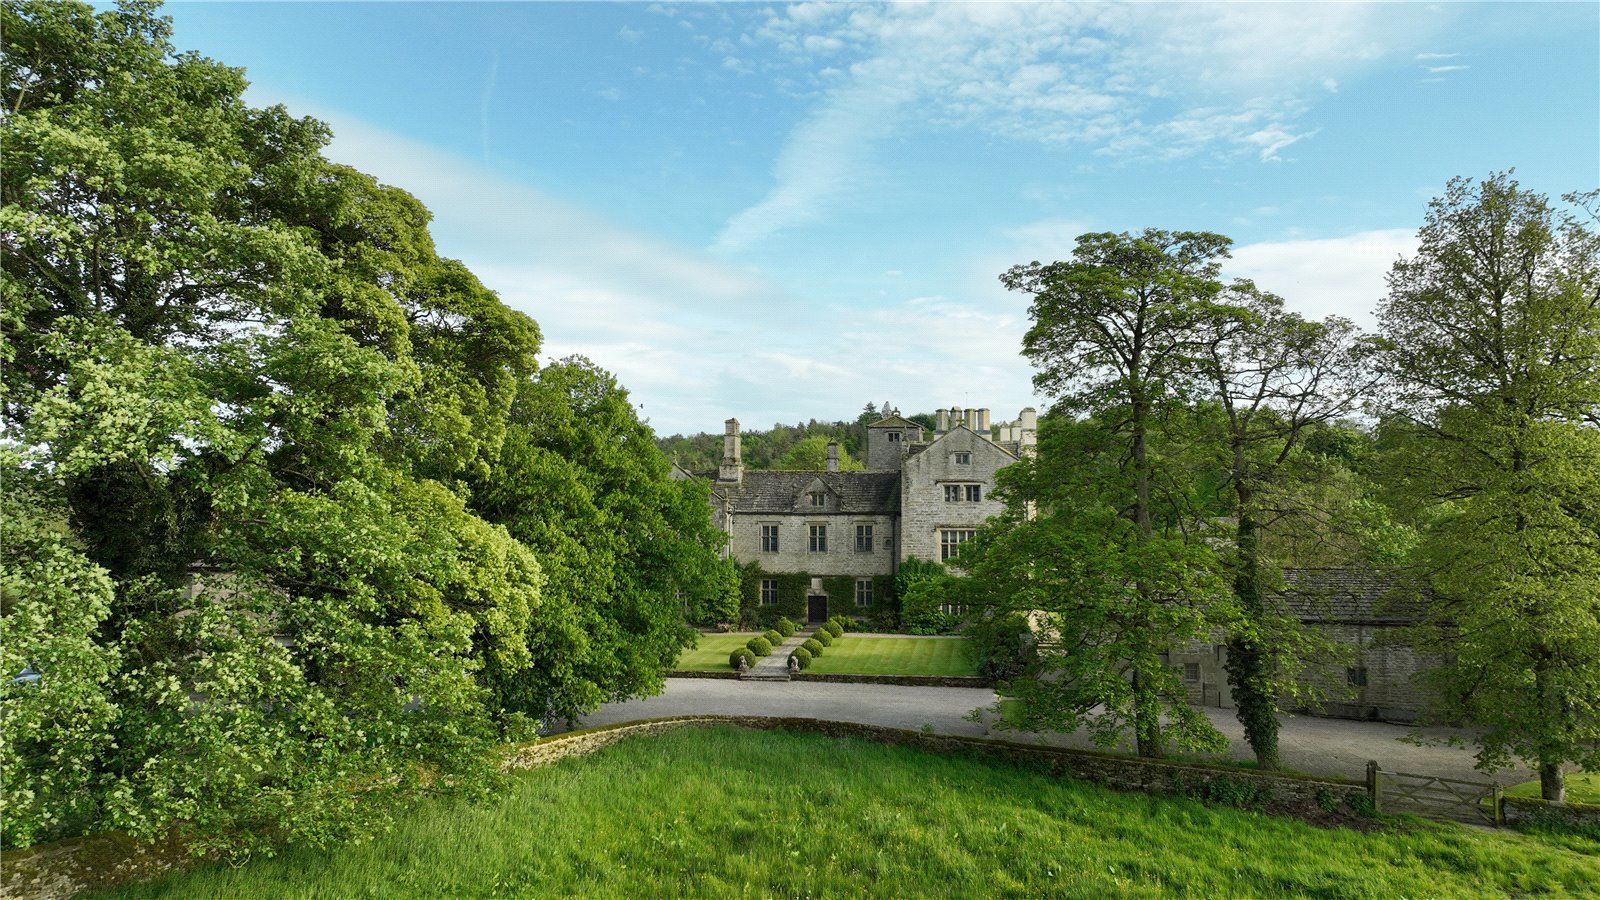 Francis York English Country Estate on the Edge of the Yorkshire Dales 00001.jpg